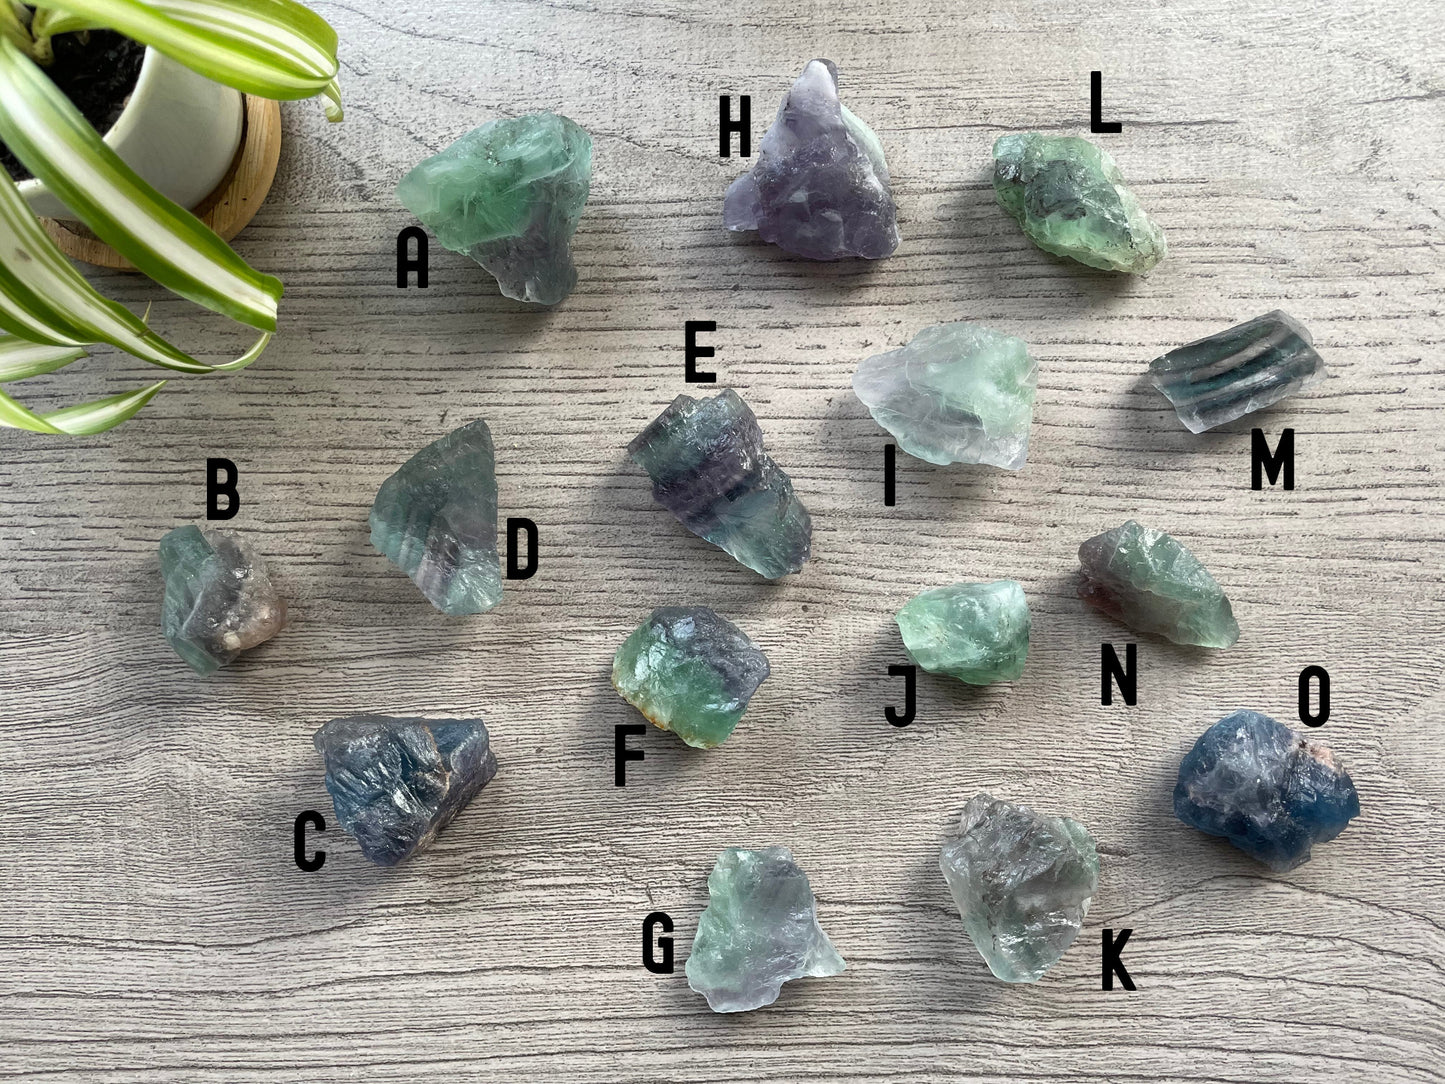 Pictured are various pieces of raw rainbow fluorite.